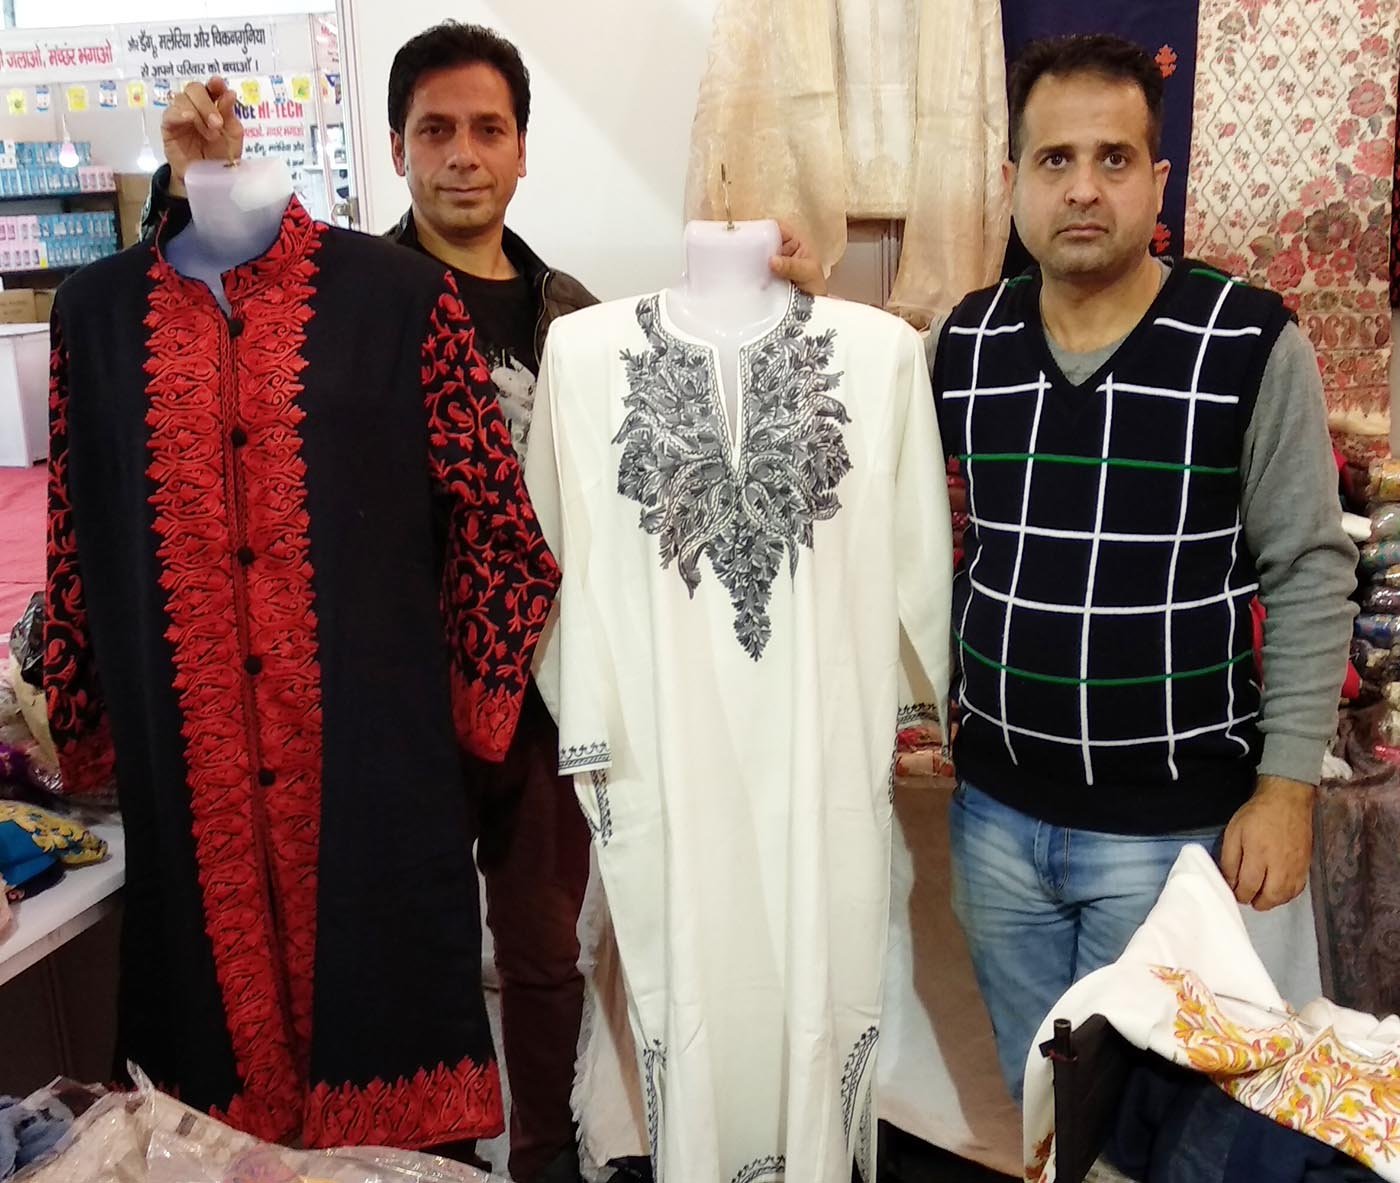 Egyptian &#038; Other First Time Exhibitors Bring Refreshing Change, Lifeinchd